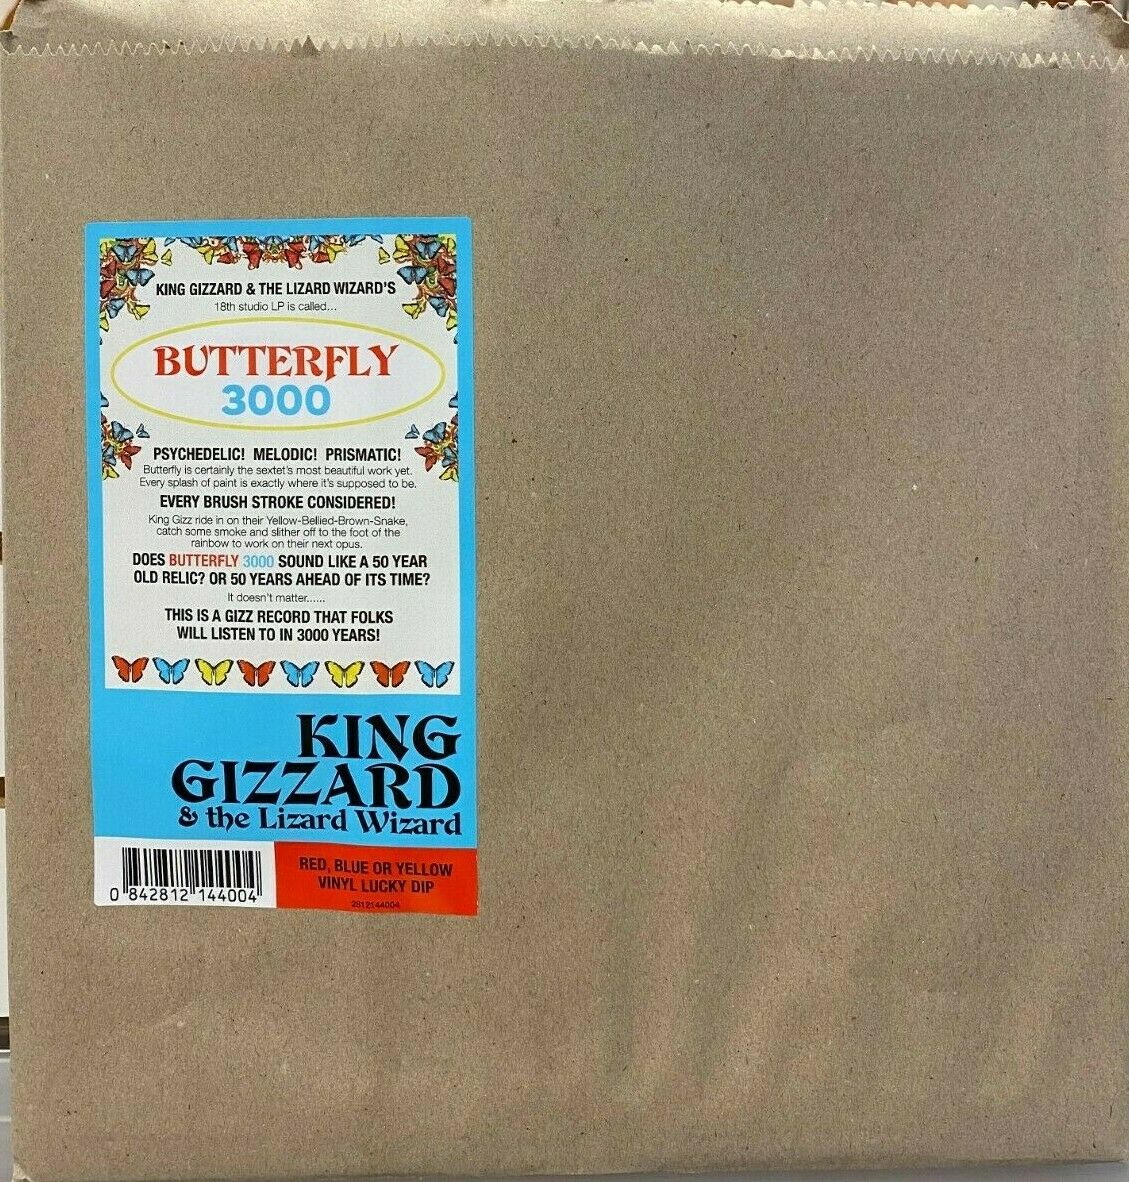 King Gizzard and the Lizard Wizard - Butterfly 3000 - Vinyl Record LP